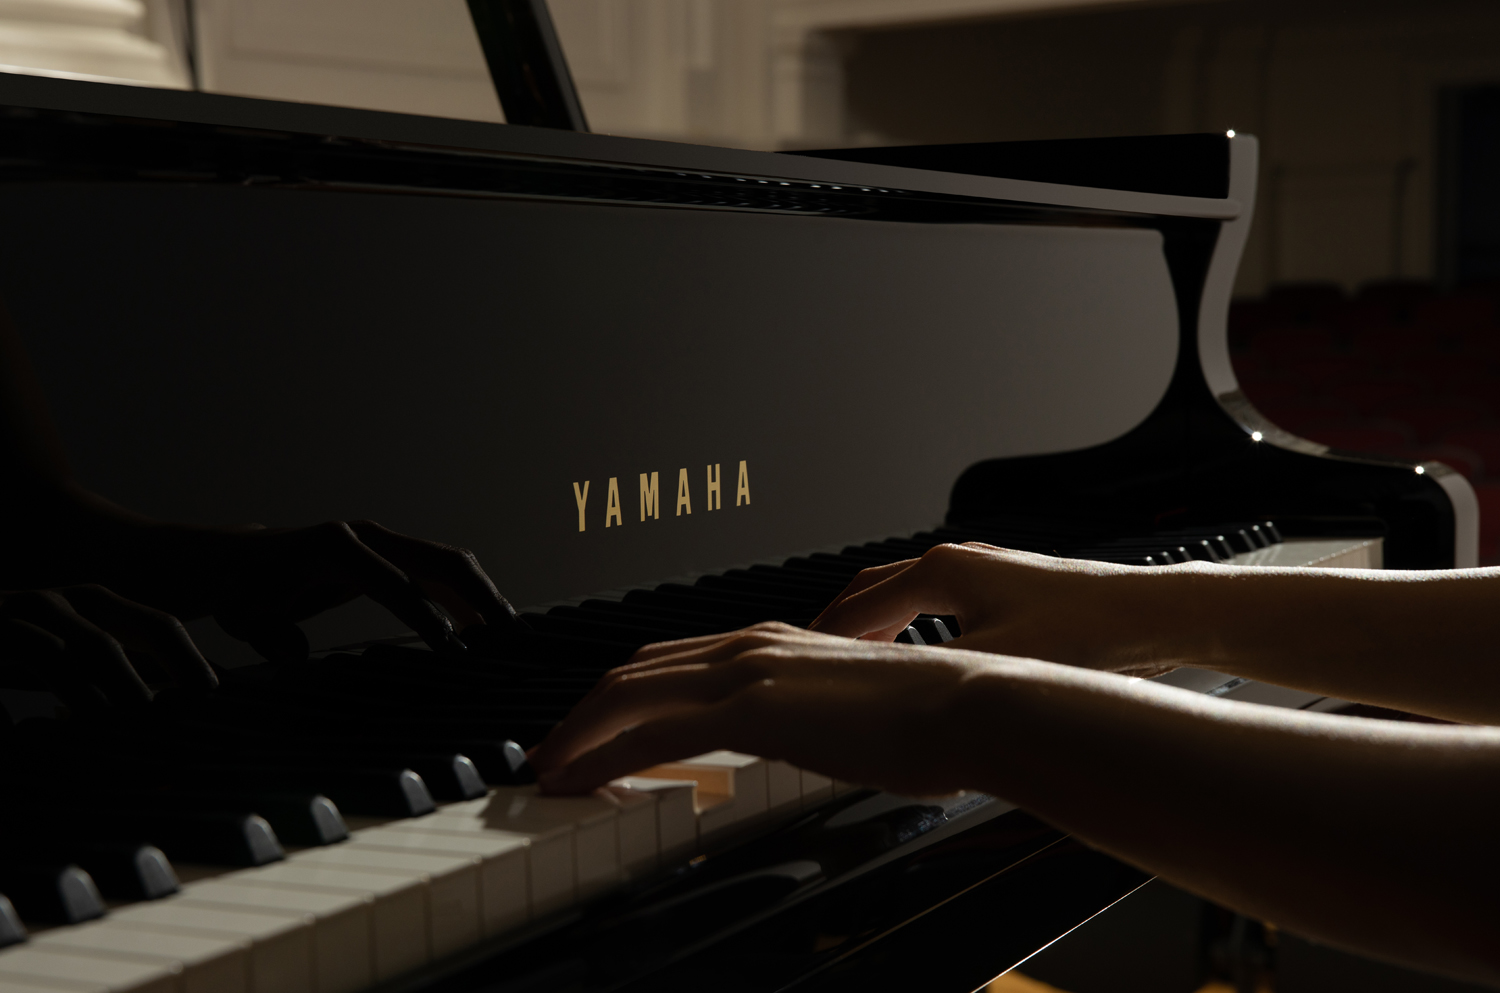 A view of a Yamaha grand piano's right side of the keyboard with lid open in background.